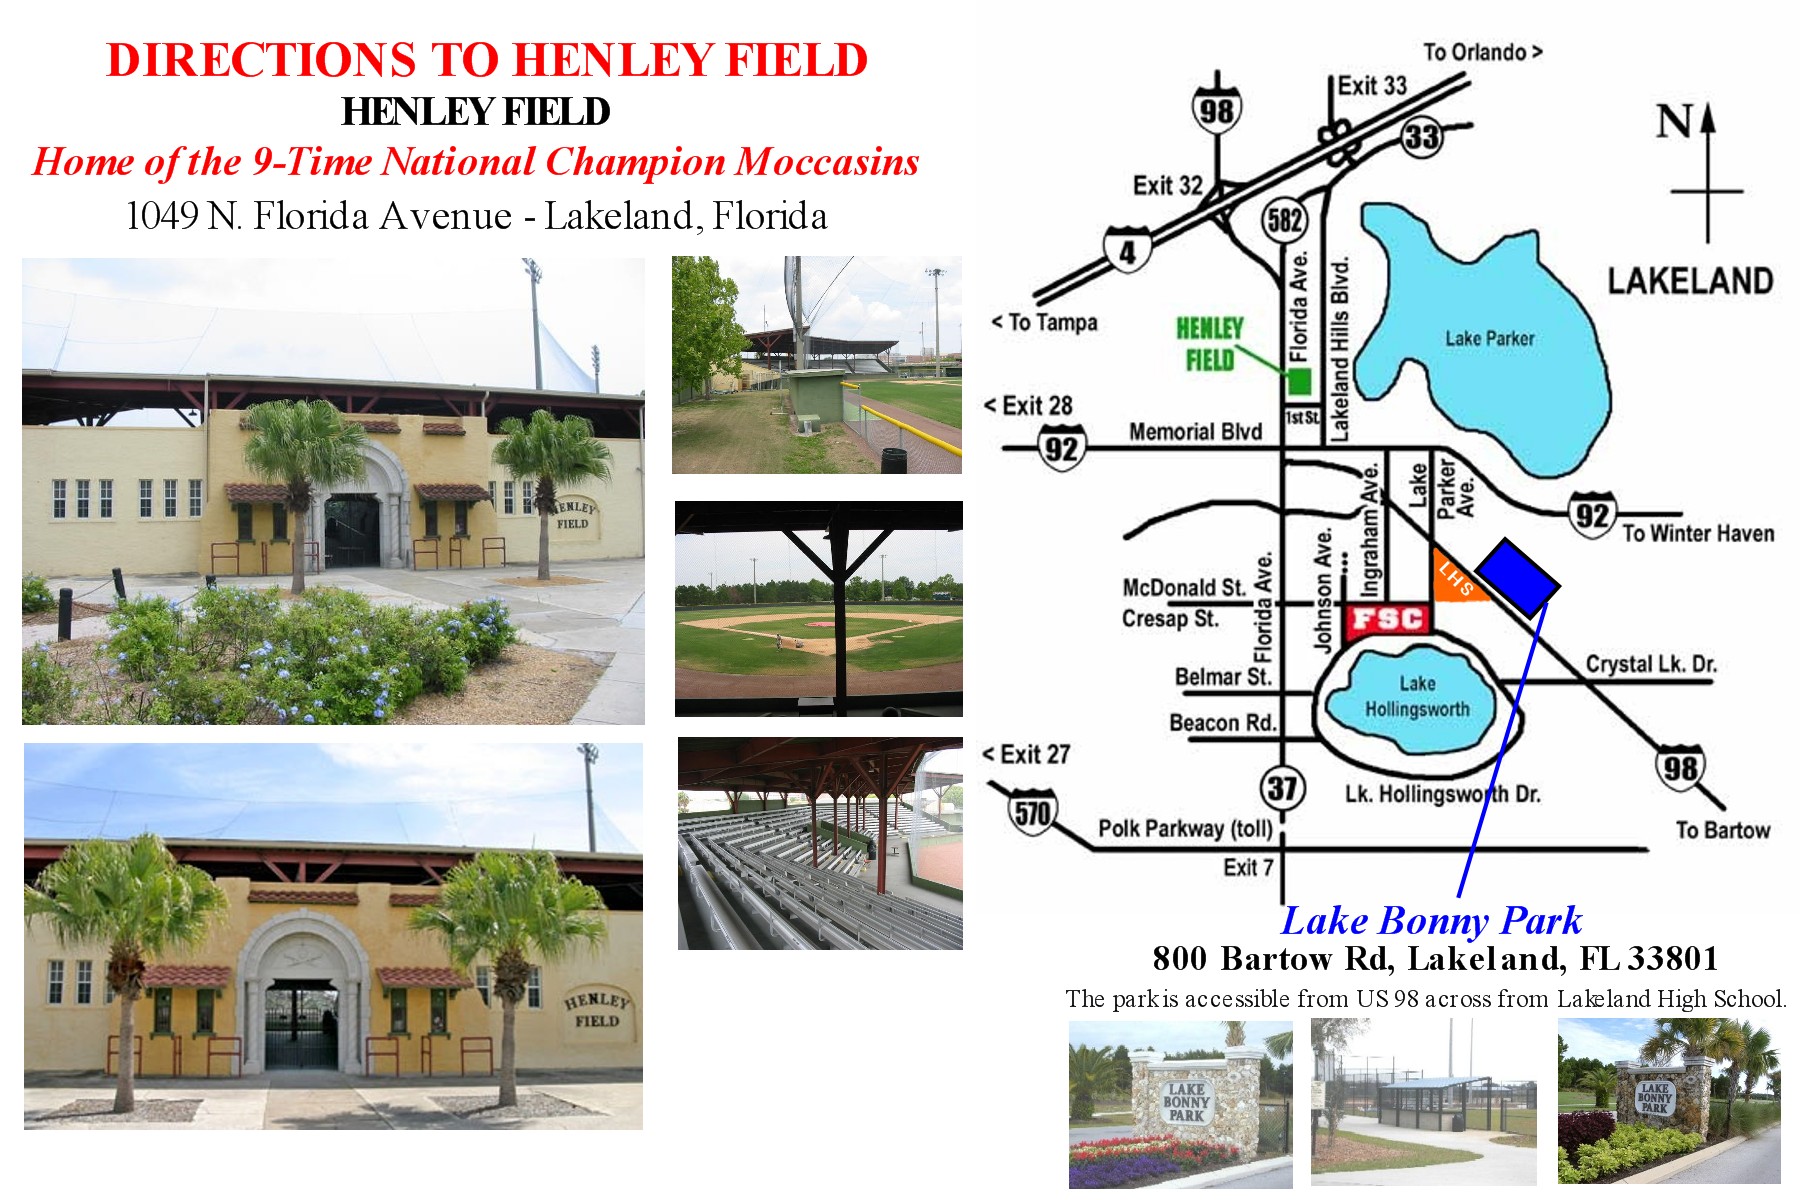 Henley Field and Lake Bonnie